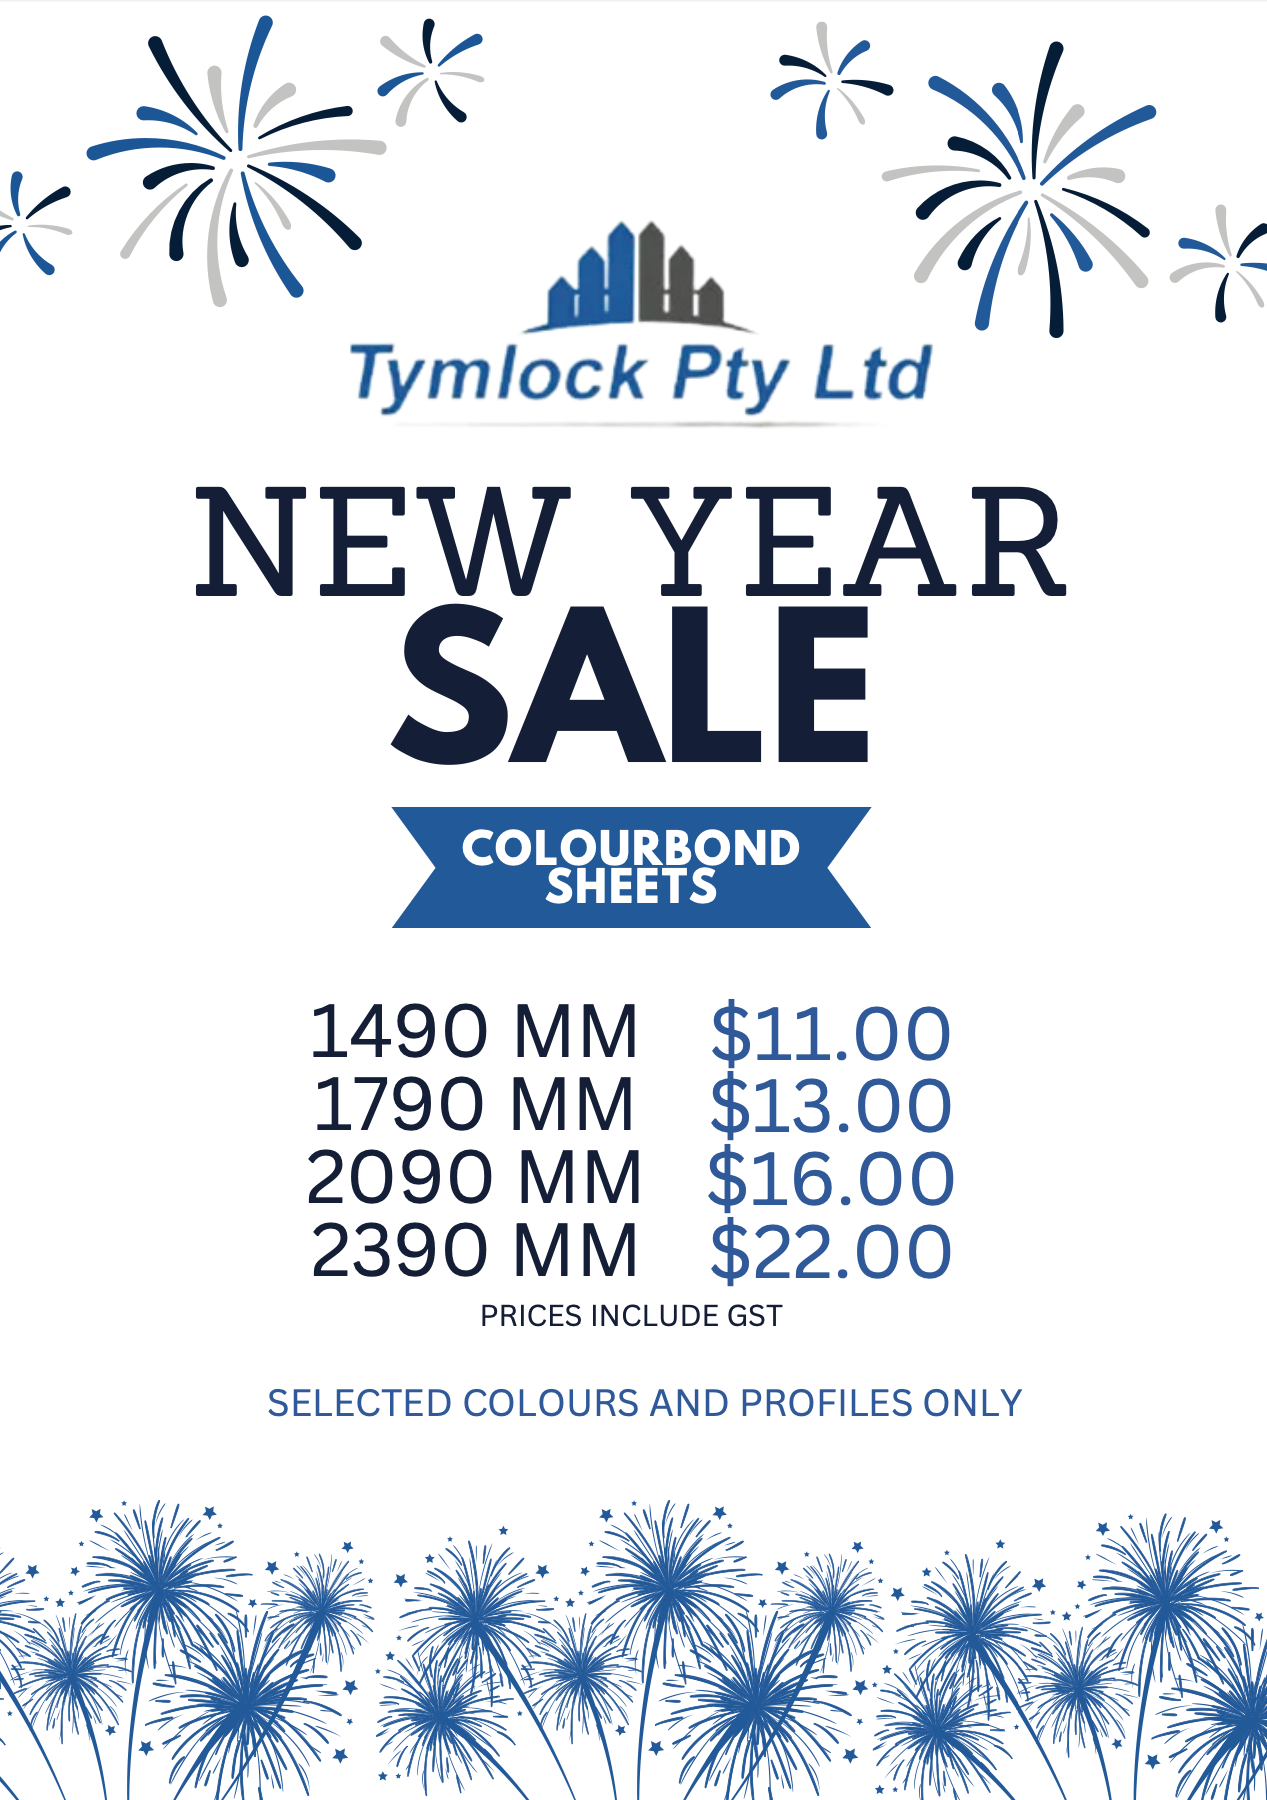 New year fencing sale